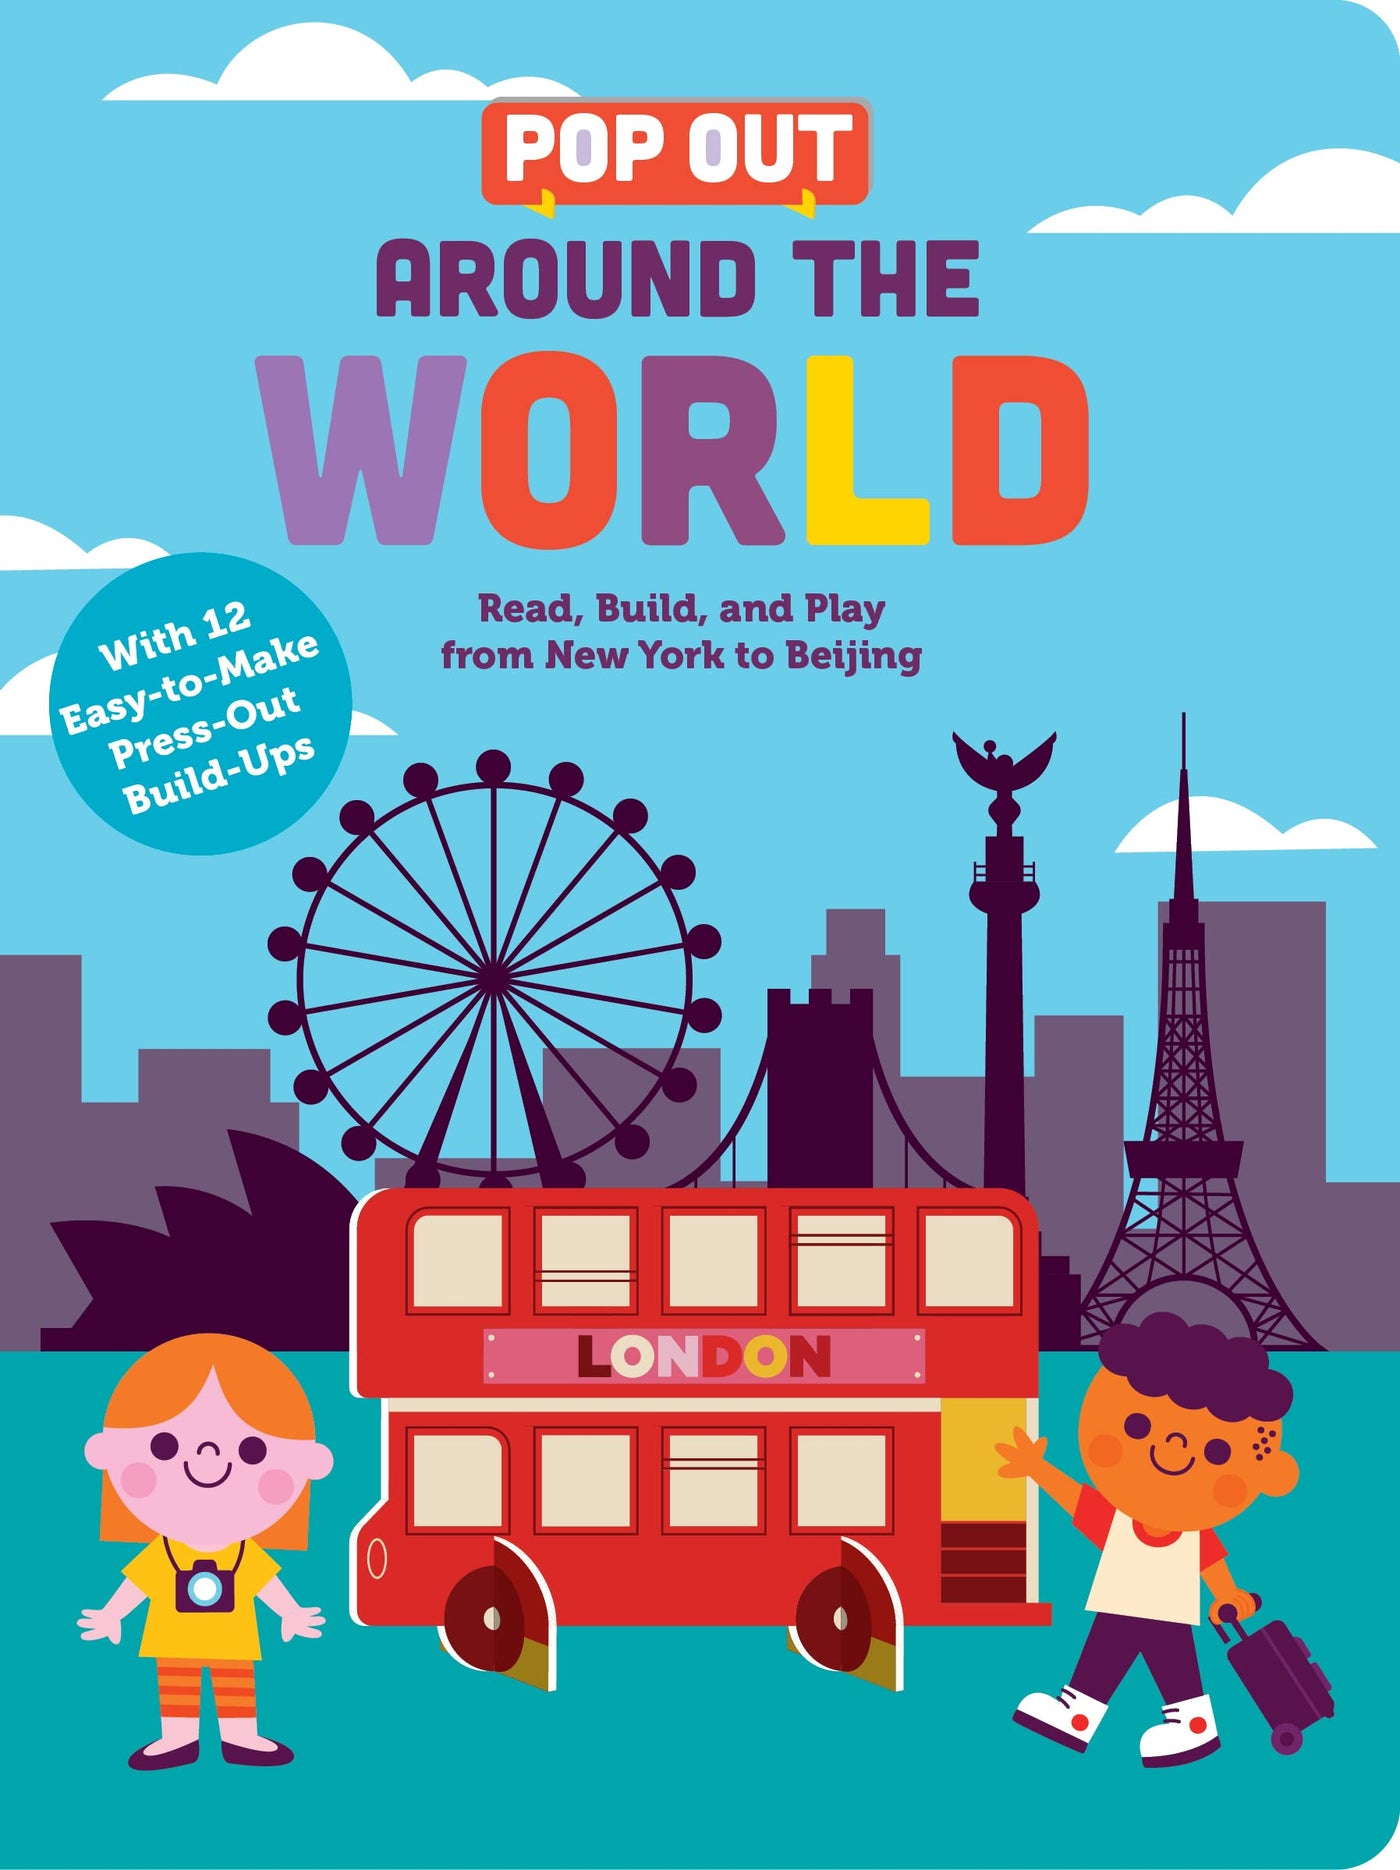 Pop Out Around the World: Read, Build, and Play from New York to Beijing